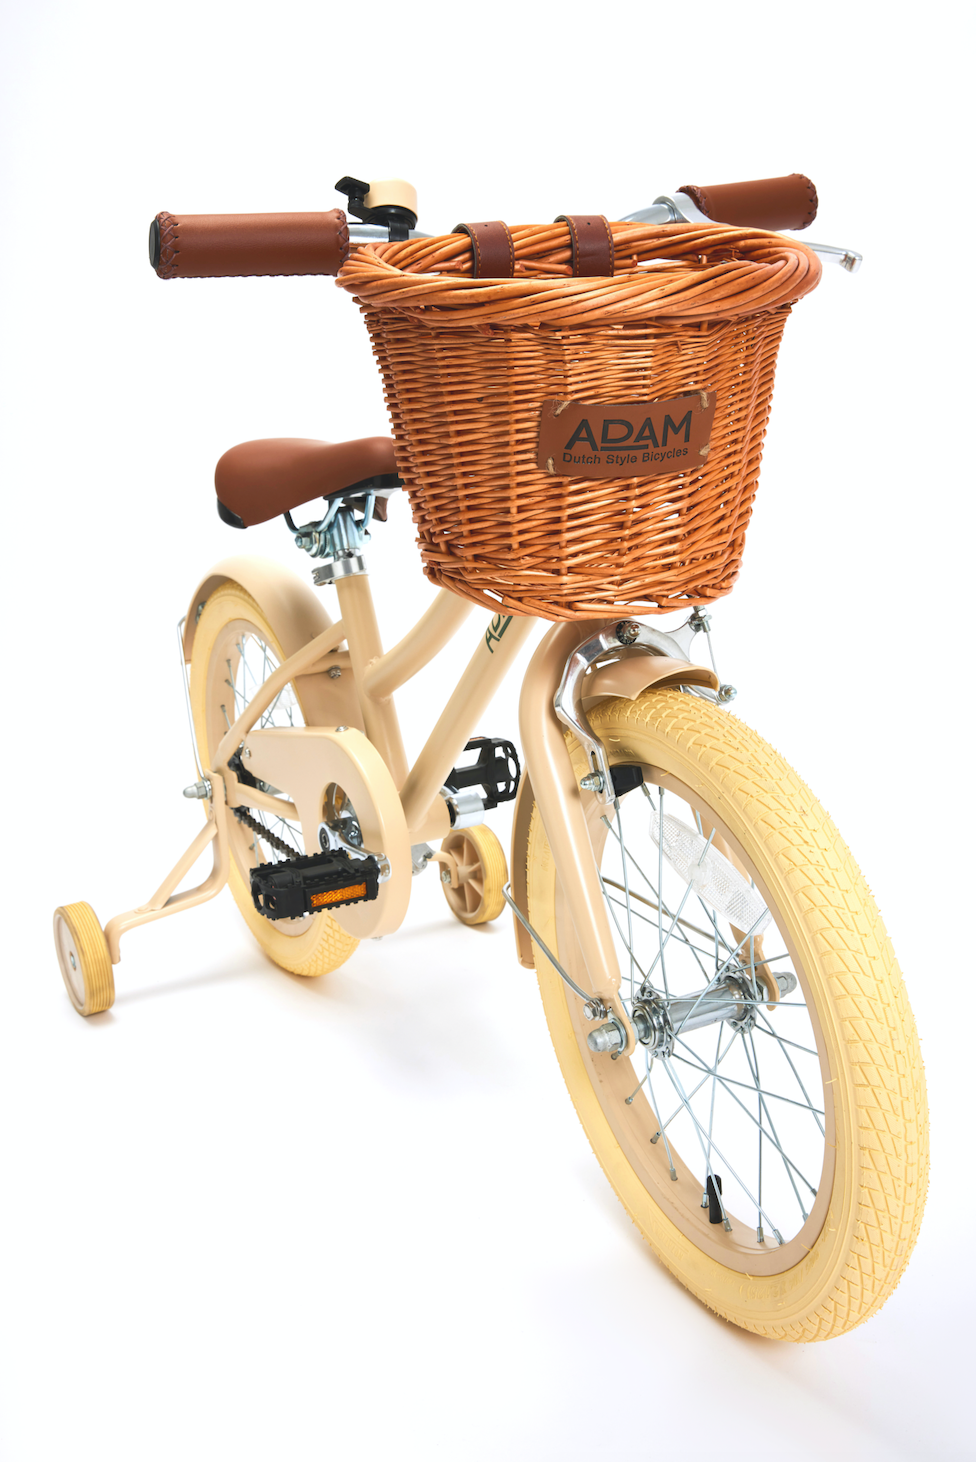 The Small Adam 16" - Bicycle for children